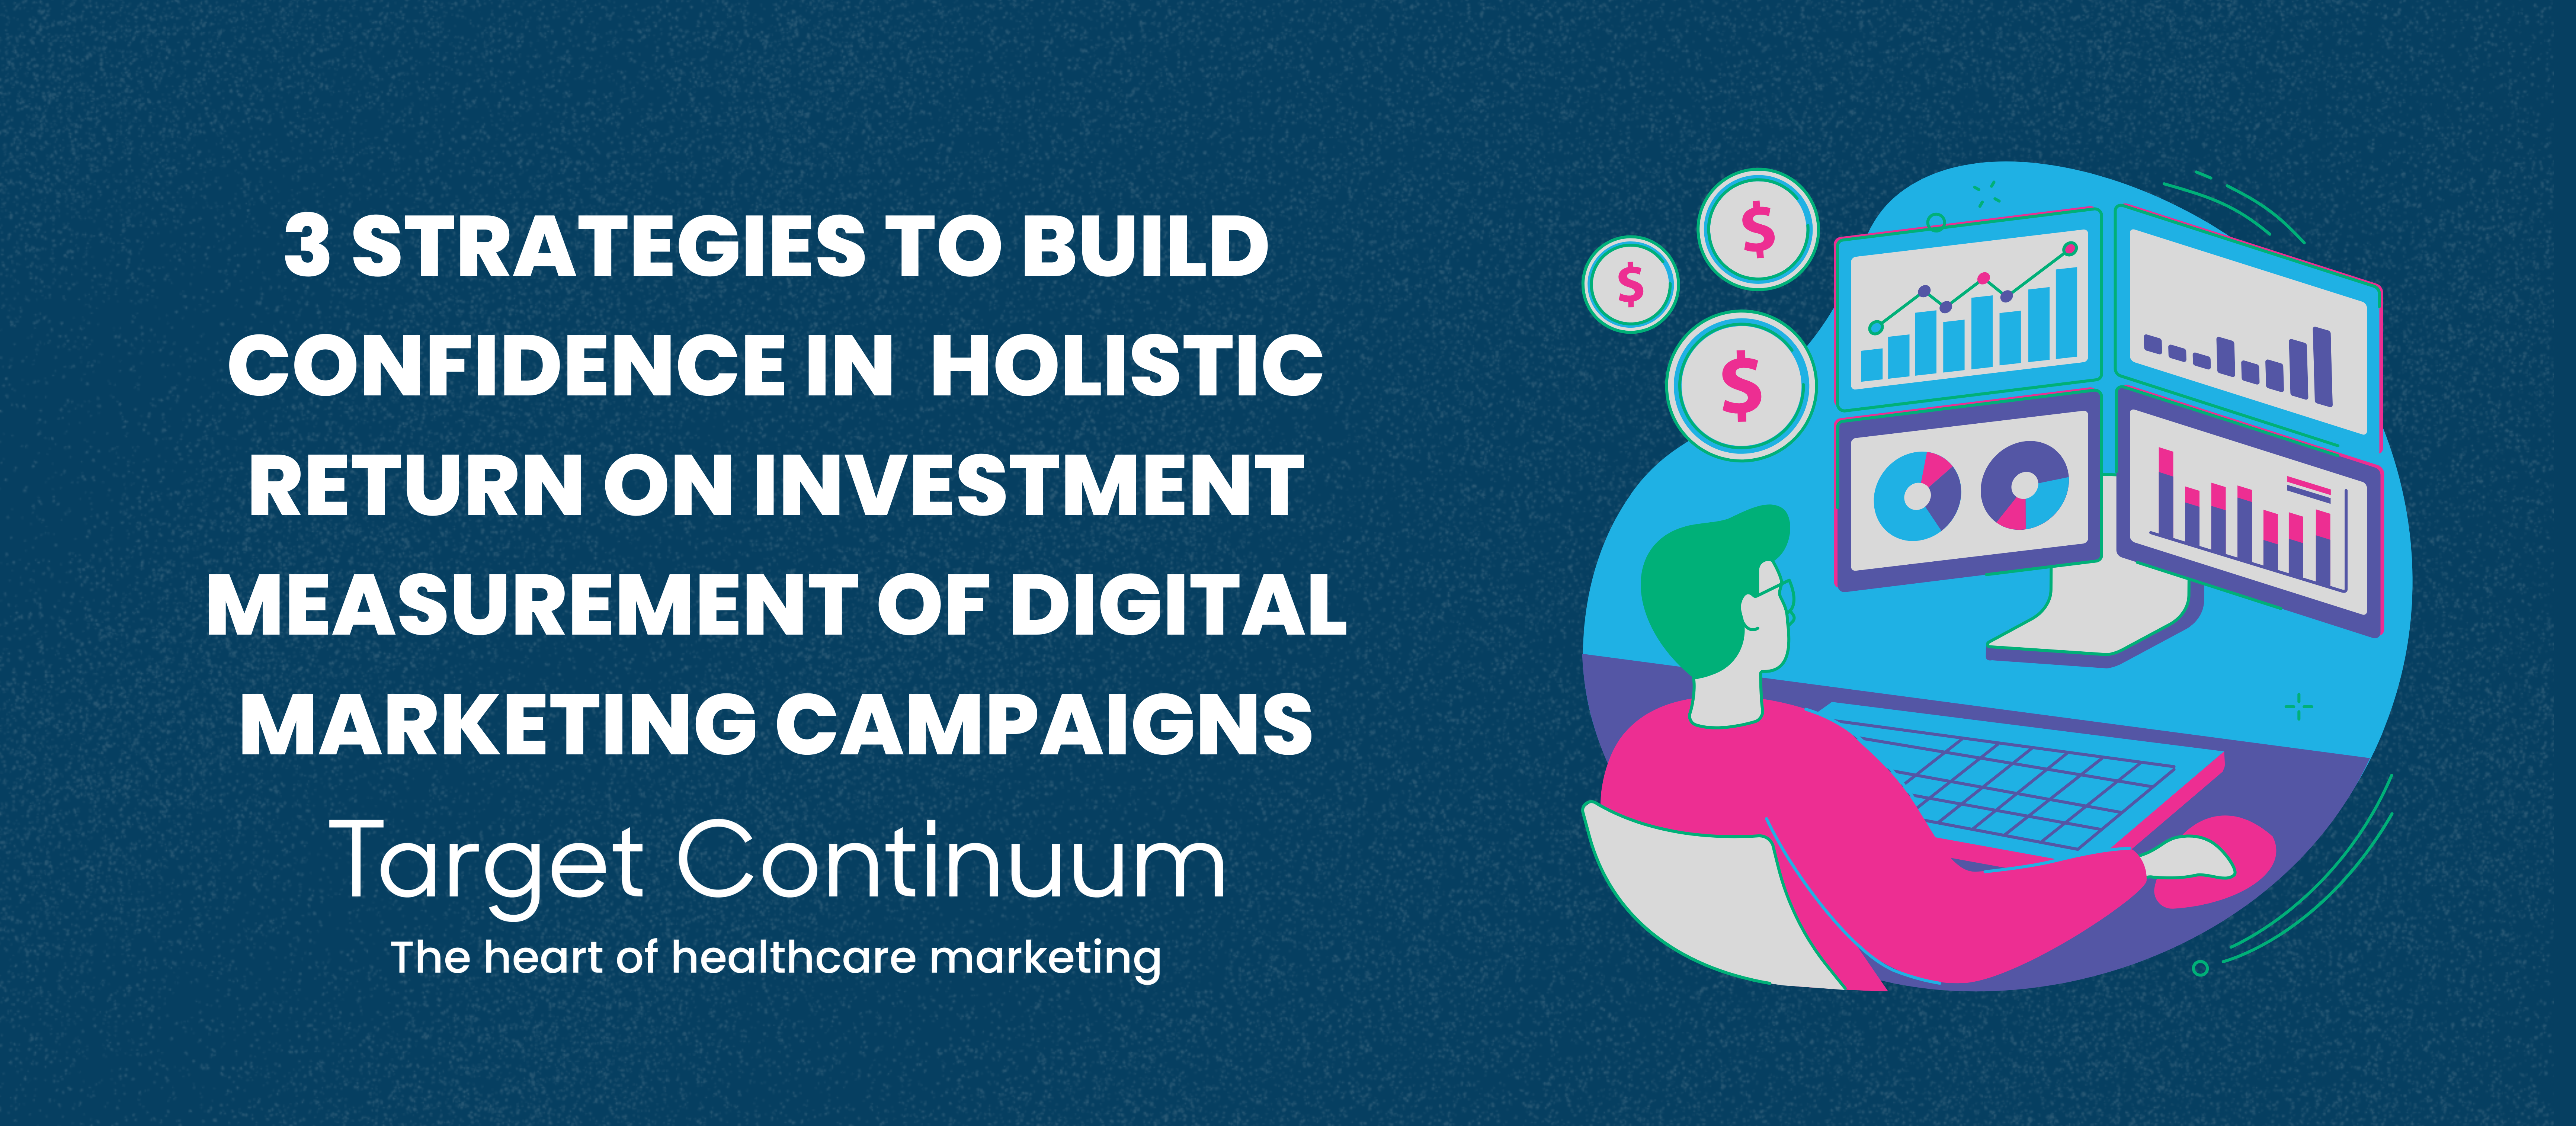 3 Strategies to Build Confidence in Holistic Return on Investment Measurement of Digital Marketing Campaigns